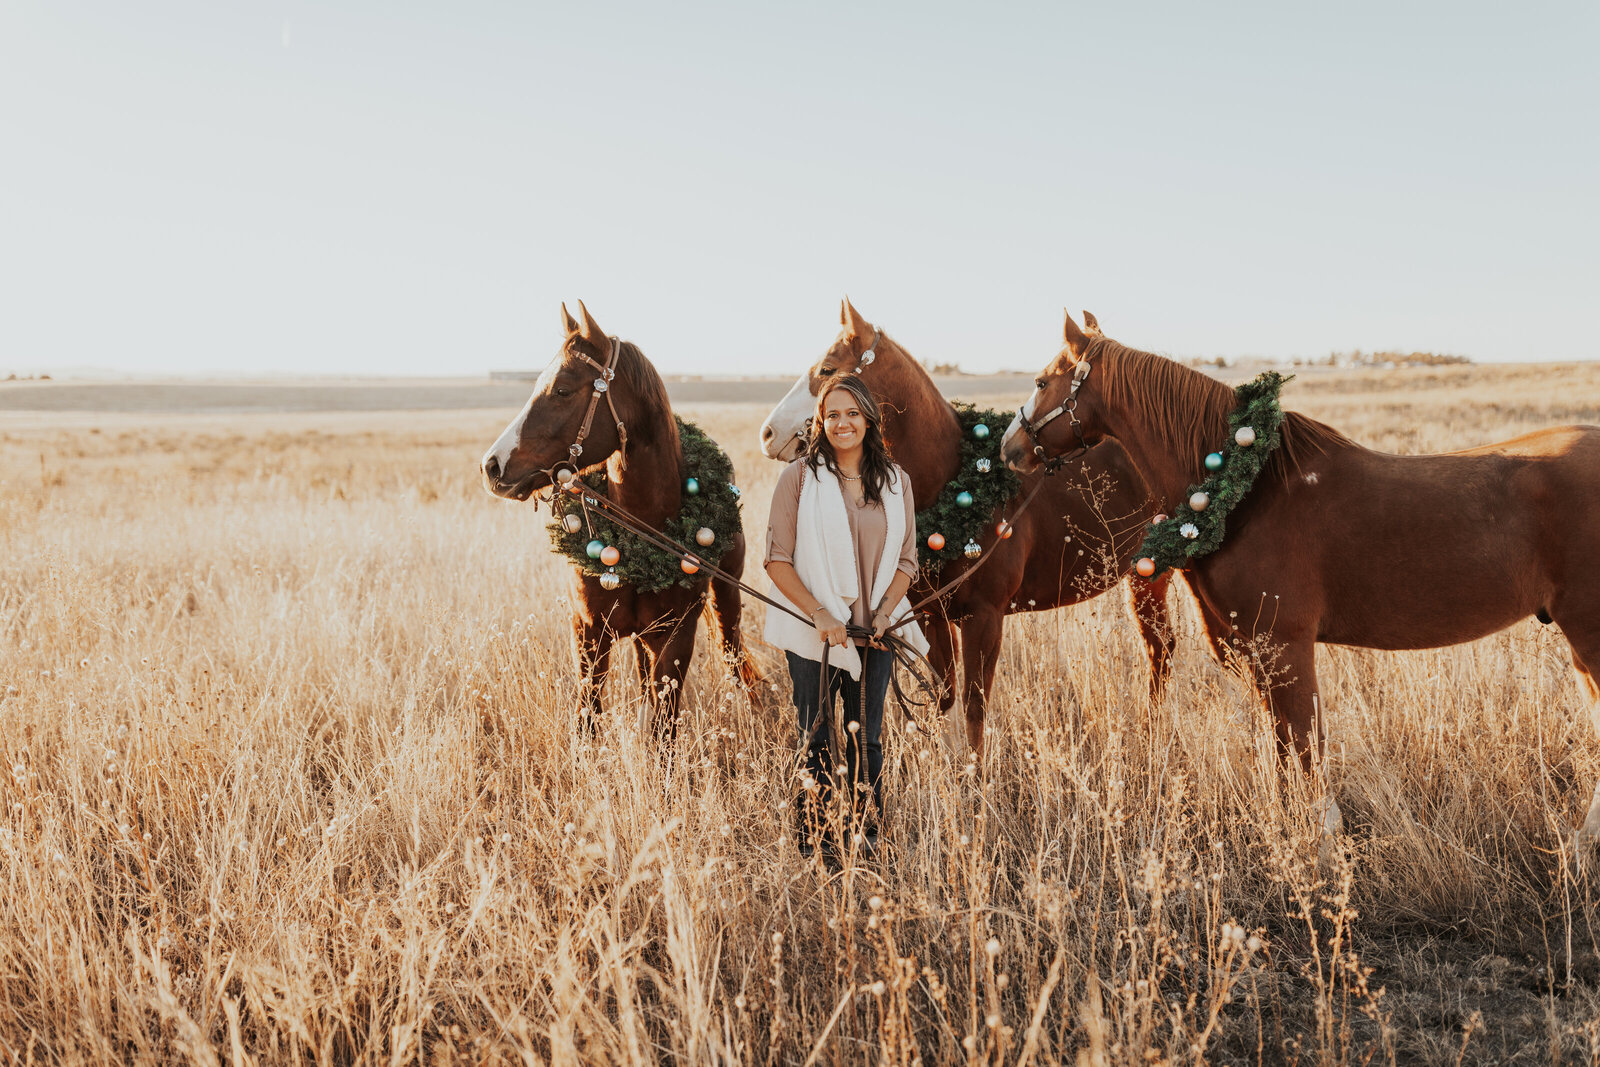 Girl poses with her horses in christmas wreaths for holiday photos